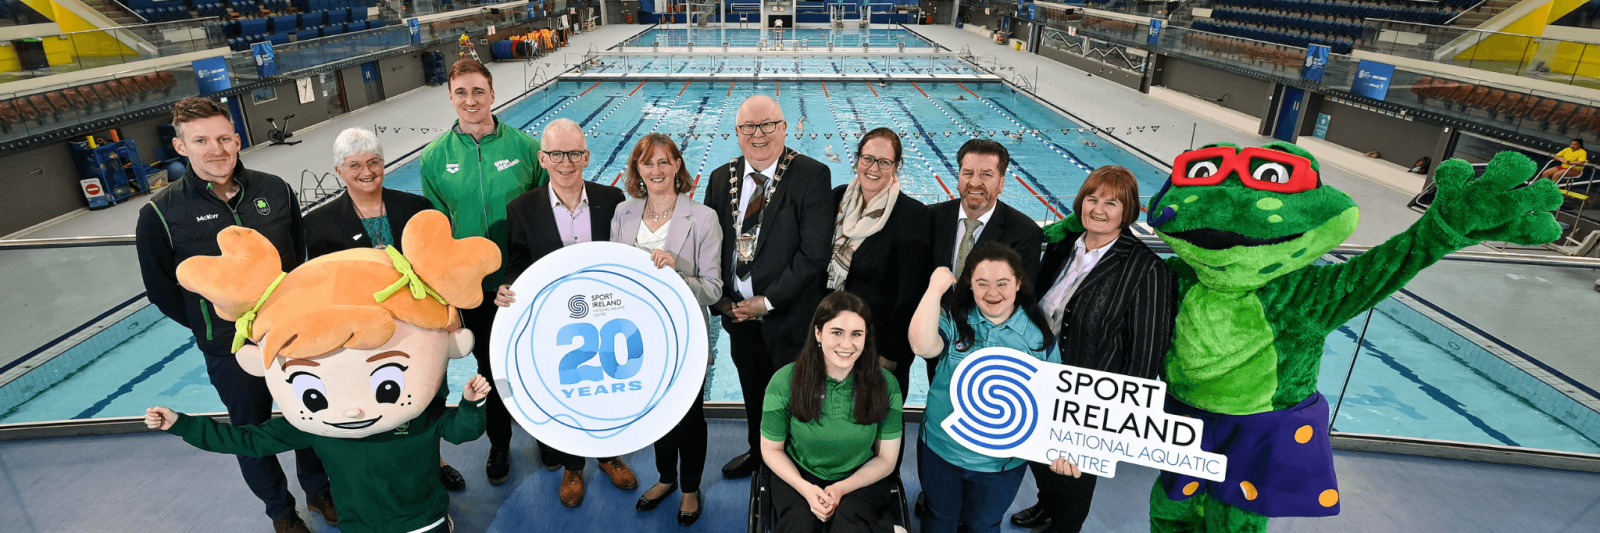 A group of people celebrating the 20th Anniversary of the National Aquatic Centre